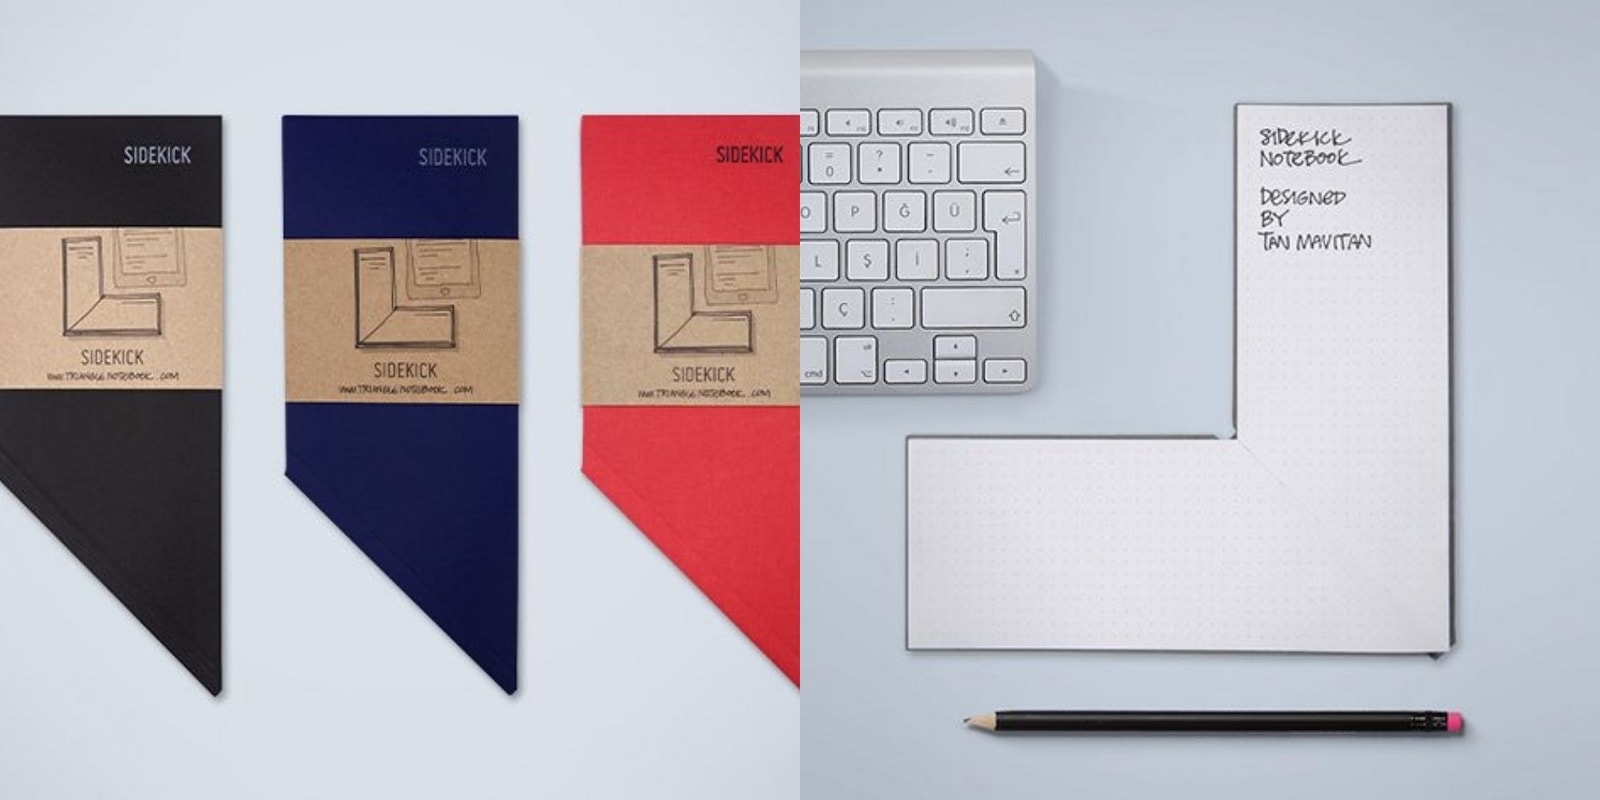 This cleverly designed notepad stays out of the way and well within reach.